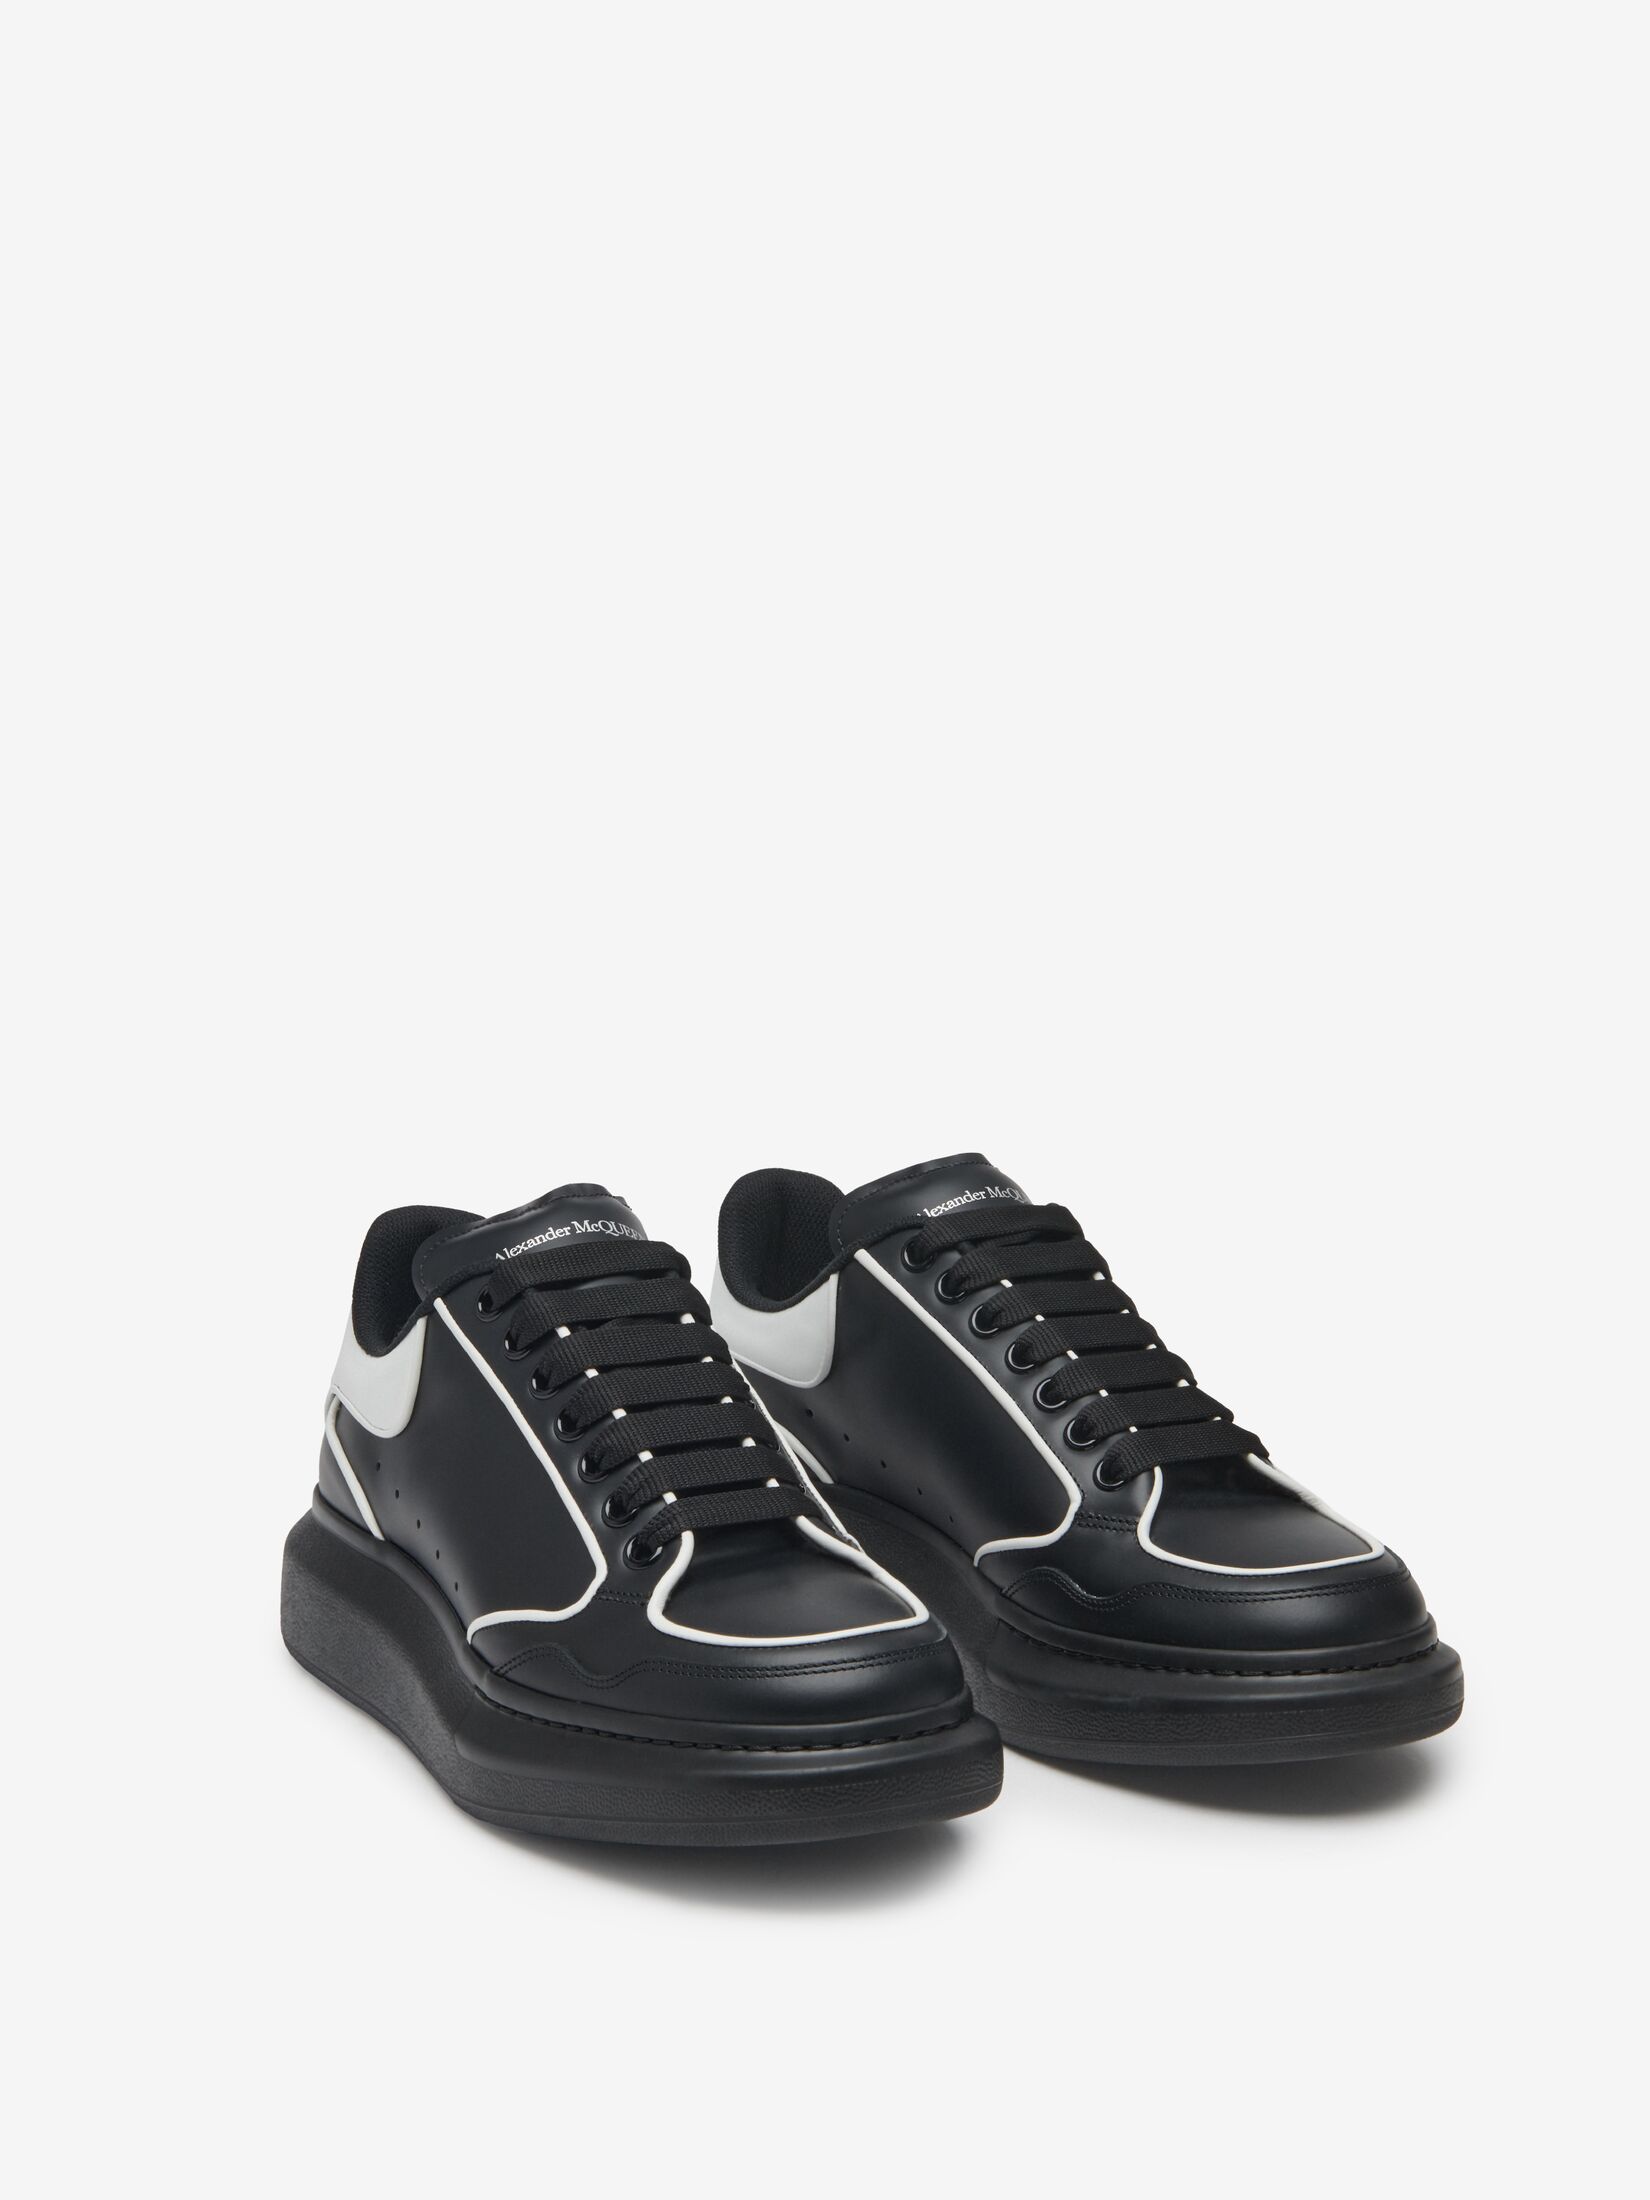 Men's Oversized Sneakers, Shoe Collection